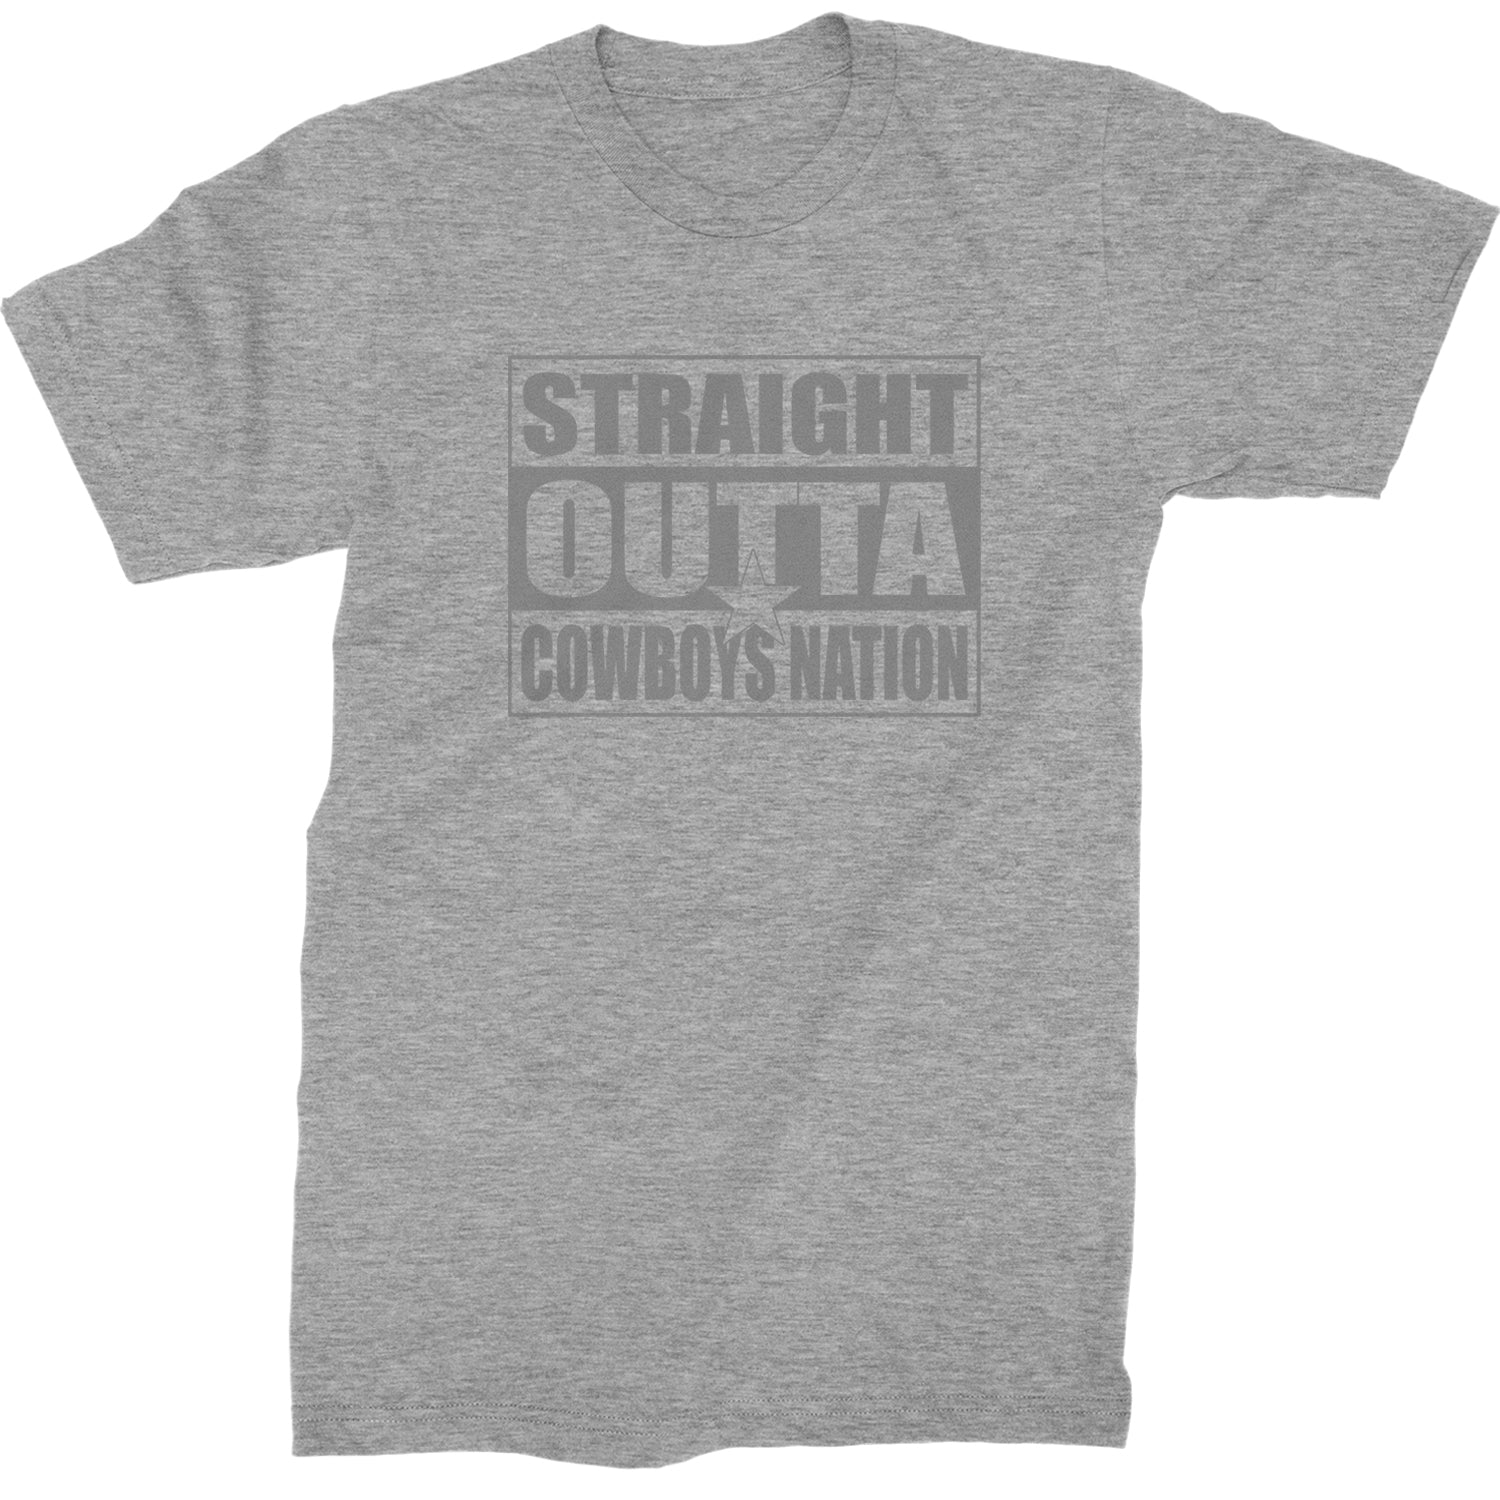 Expression Tees Straight Outta Cowboys Nation Unisex Adult Hoodie